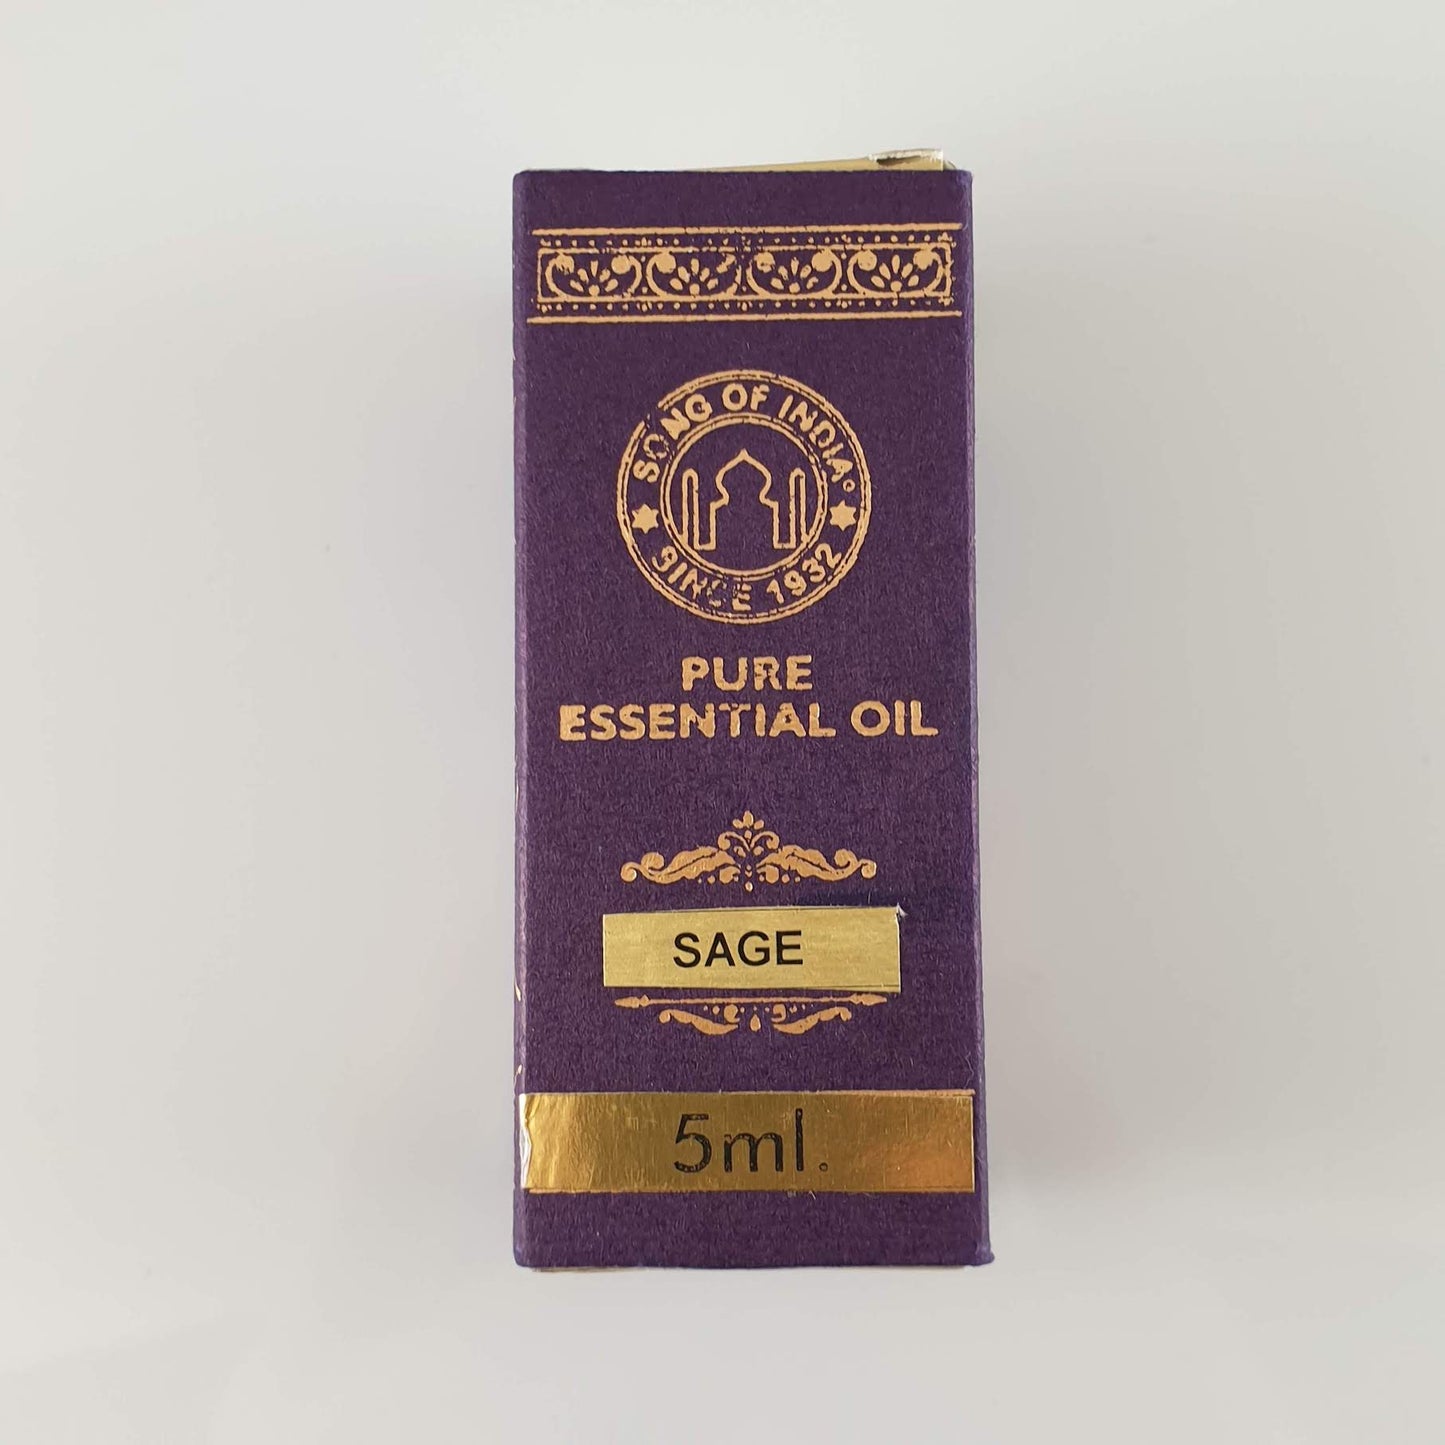 Song of India Essential Oil - Sage 5ml - Rivendell Shop